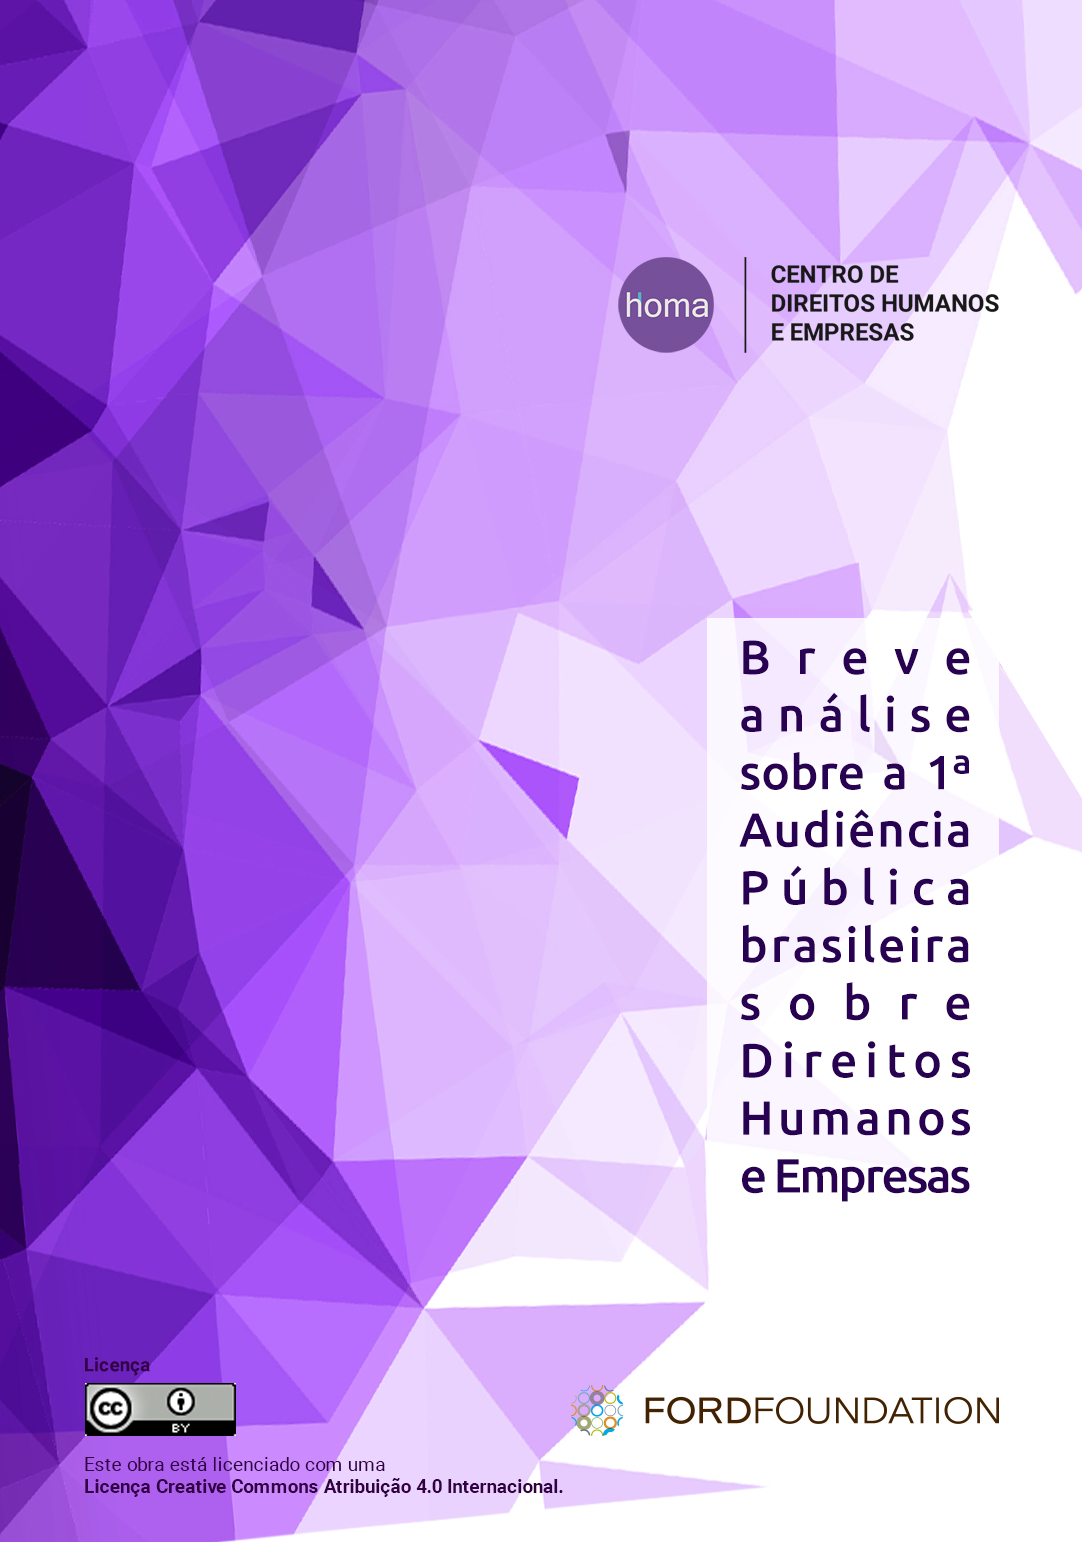 Brief analysis on the 1st Brazilian Public Hearing on Human Rights and Companies